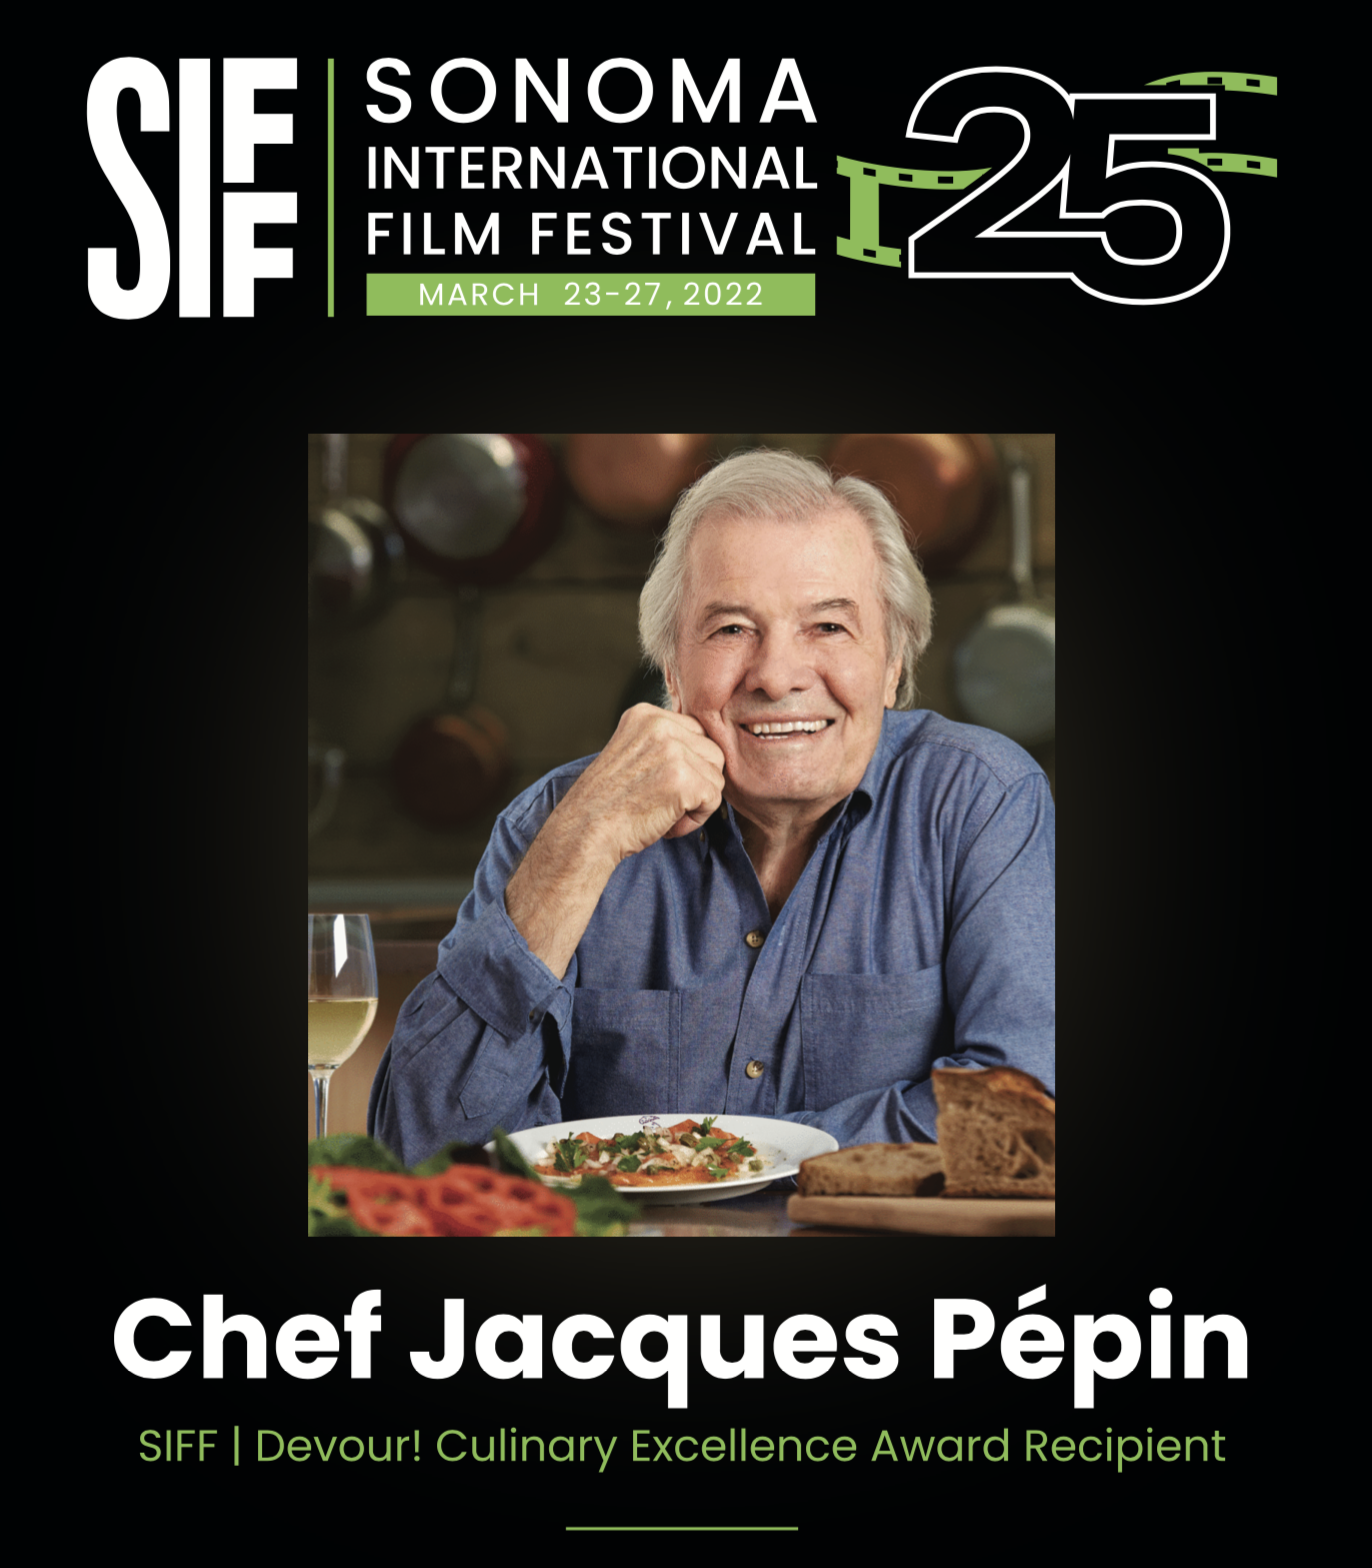 SIFF Devour! Chefs & Shorts Culinary Event Honoring Chef Jacques